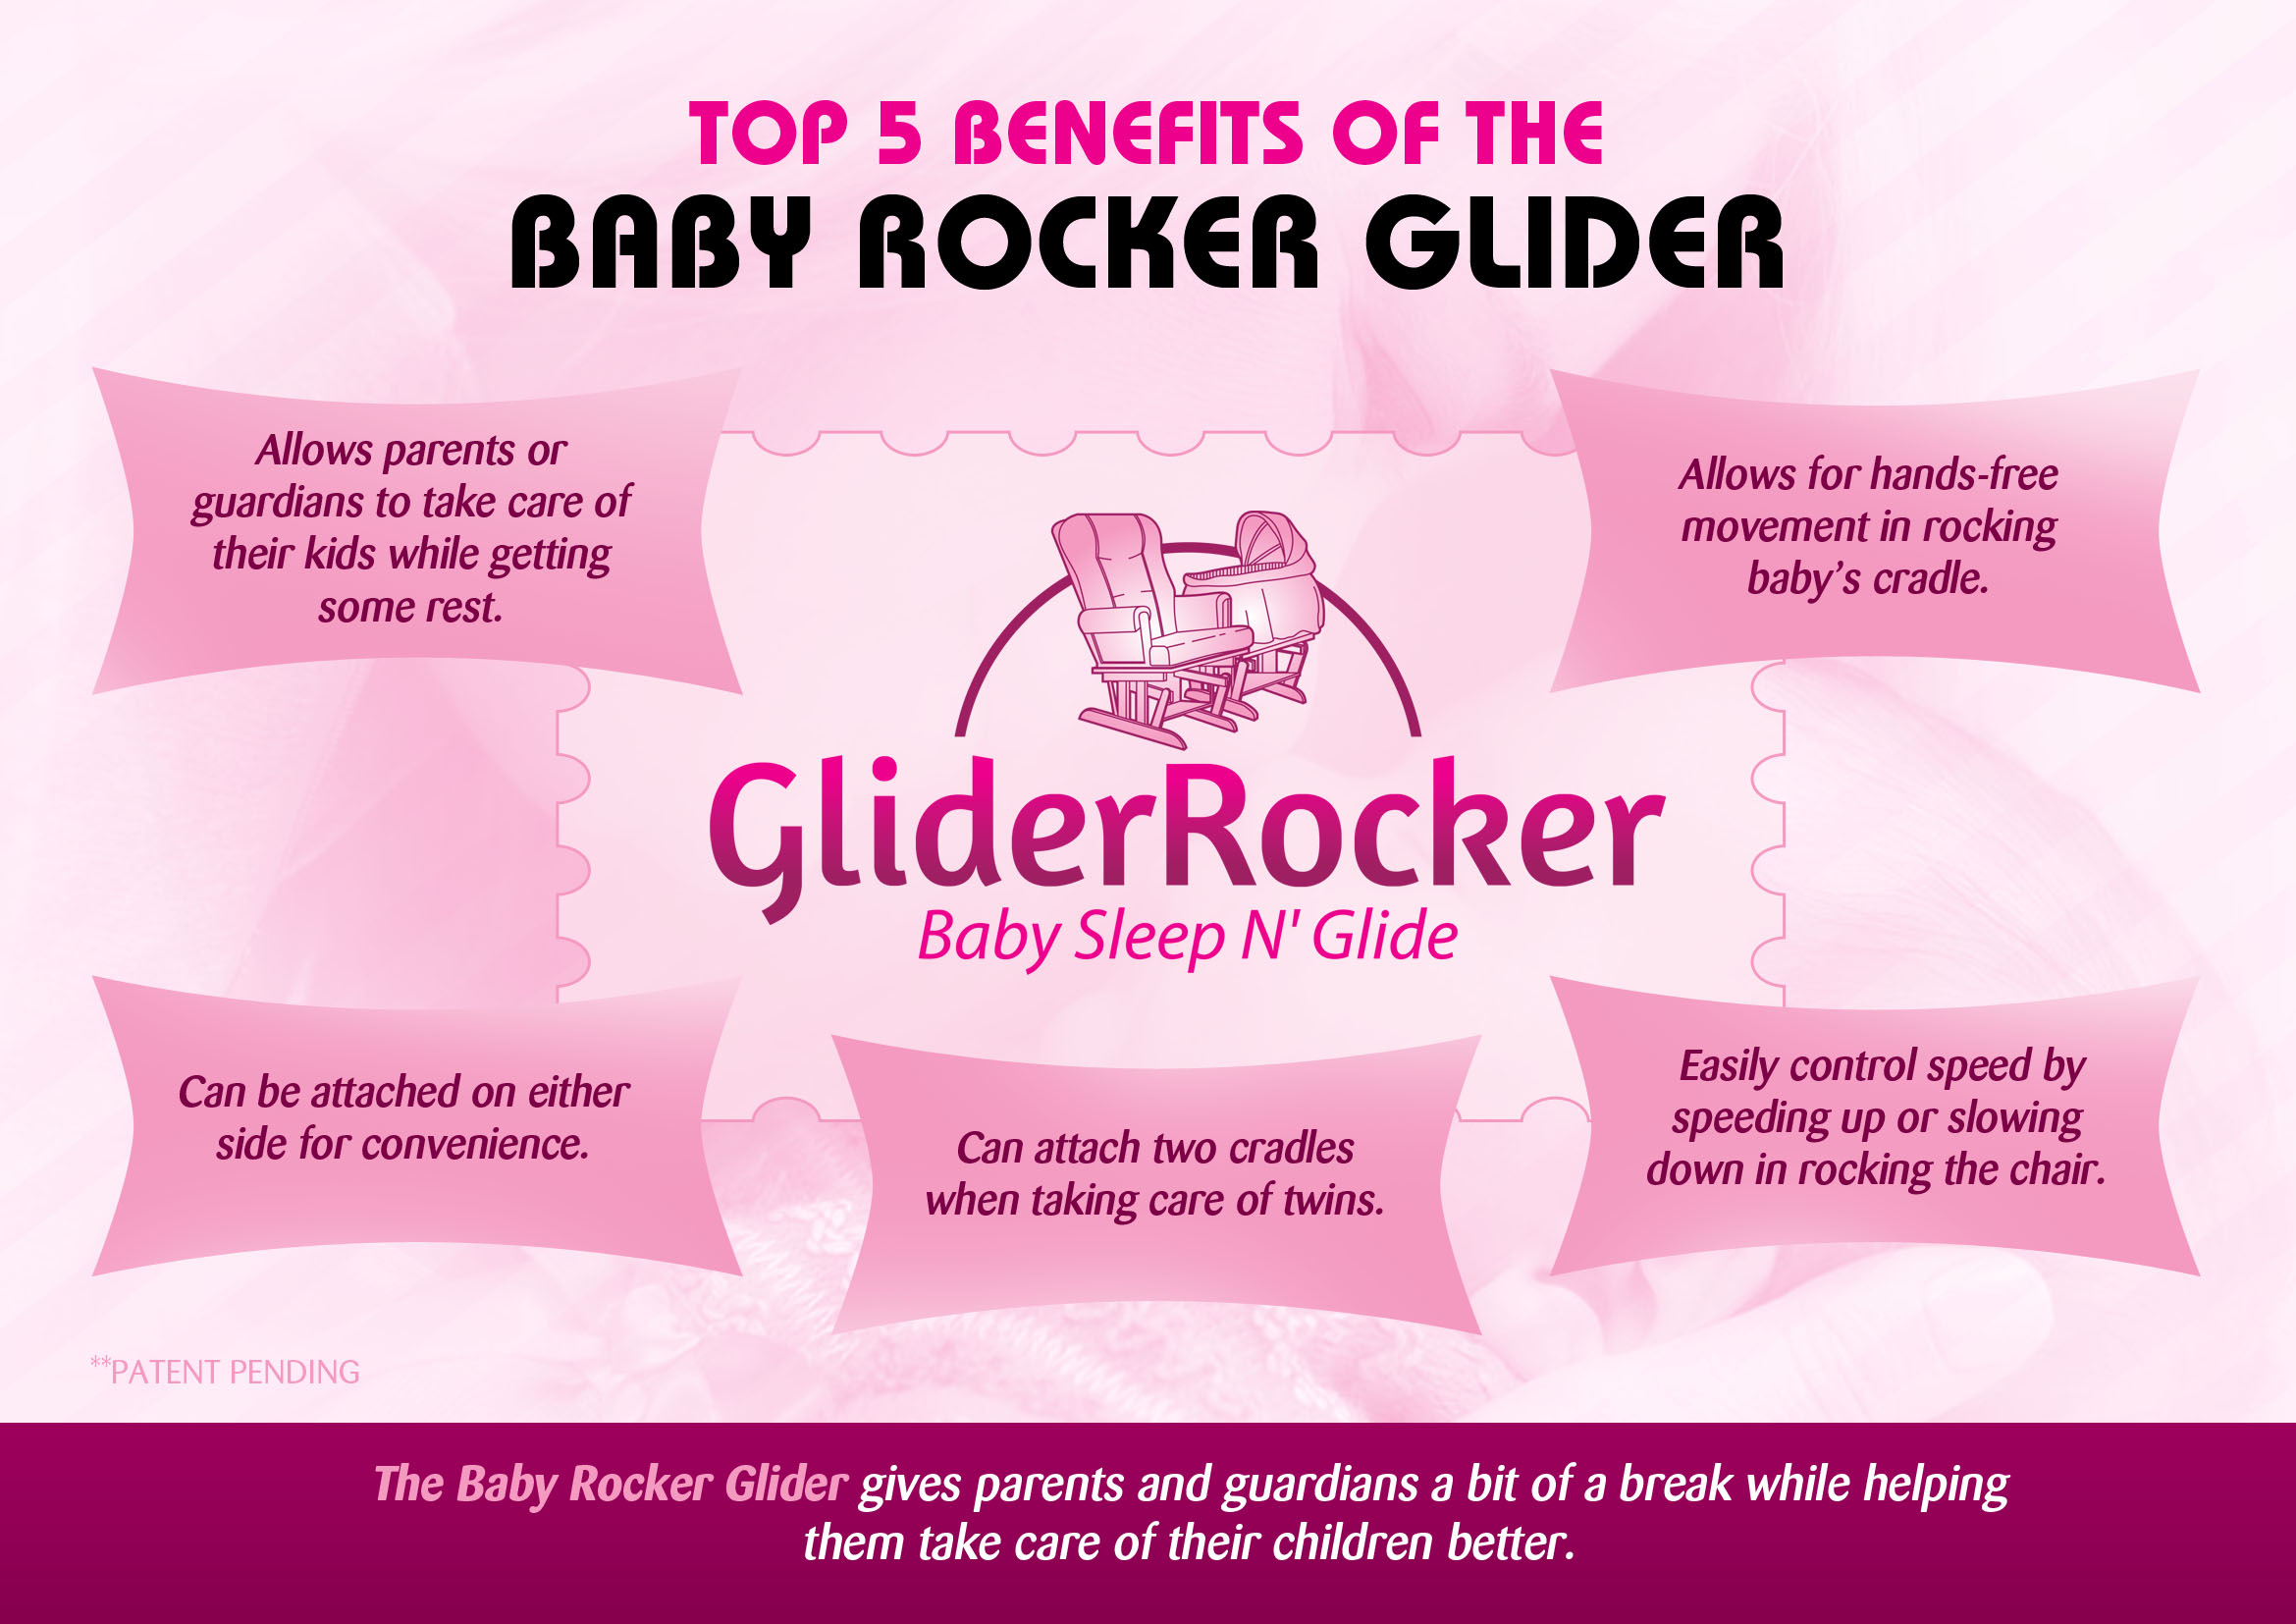 Baby Rocker Glider, a baby invention designed to rock an infant child to sleep while getting some much needed rest at the same time.